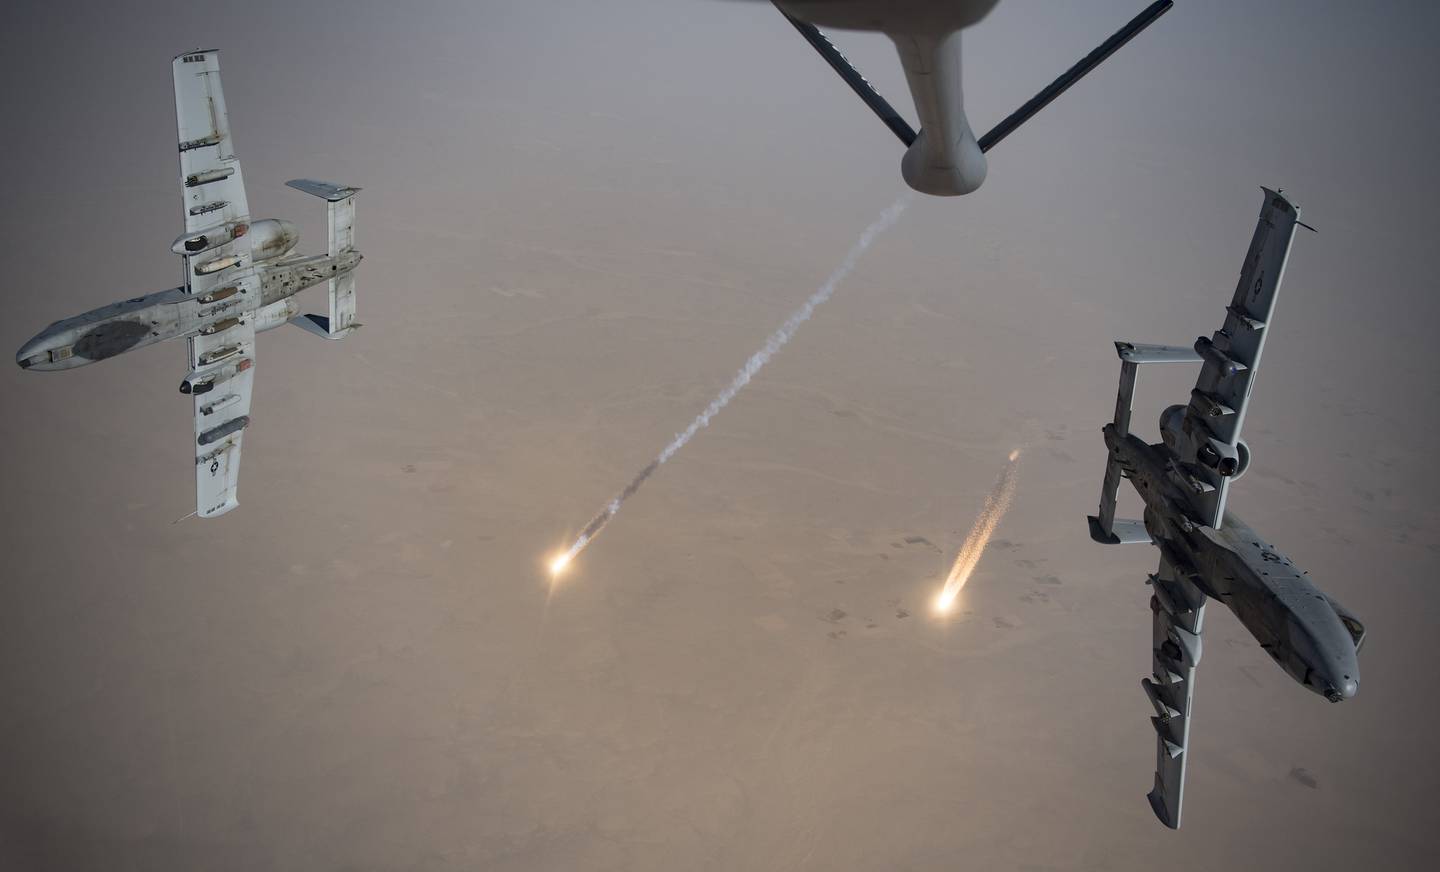 U.S. Air Force A-10 Thunderbolt IIs fire flares while breaking away after aerial refueling from a KC-135 Stratotanker out of Kandahar Airfield, Afghanistan, Aug. 15, 2019.